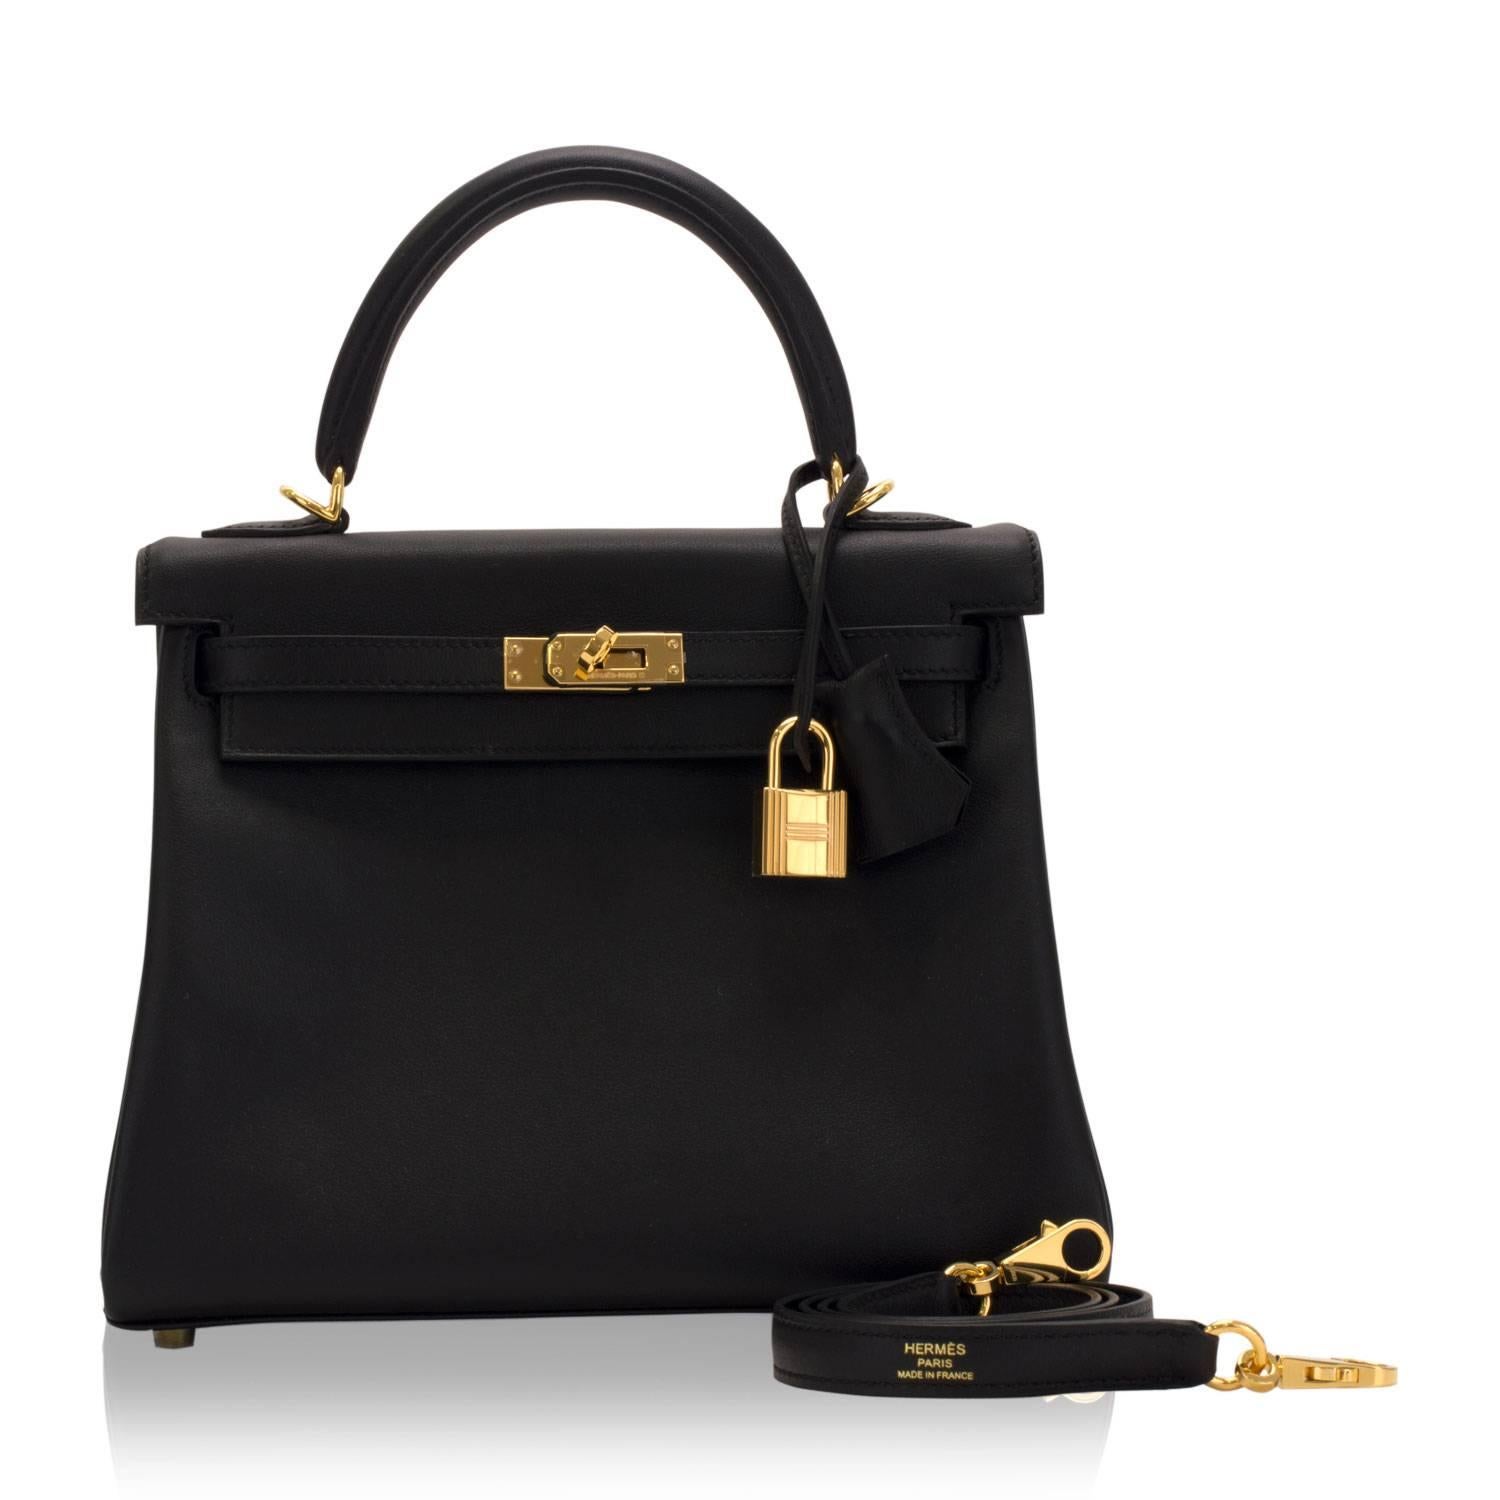 Hermes Handbag Kelly 25 Swift Leather 89 Black Color Gold Hardware 2016

Pre-owned and never used.

Bought it in Hermes store in 2016.

Composition: Leather.

Model: Kelly.

Size: 25x17x7cm

Color: 89 Black

Stamp: